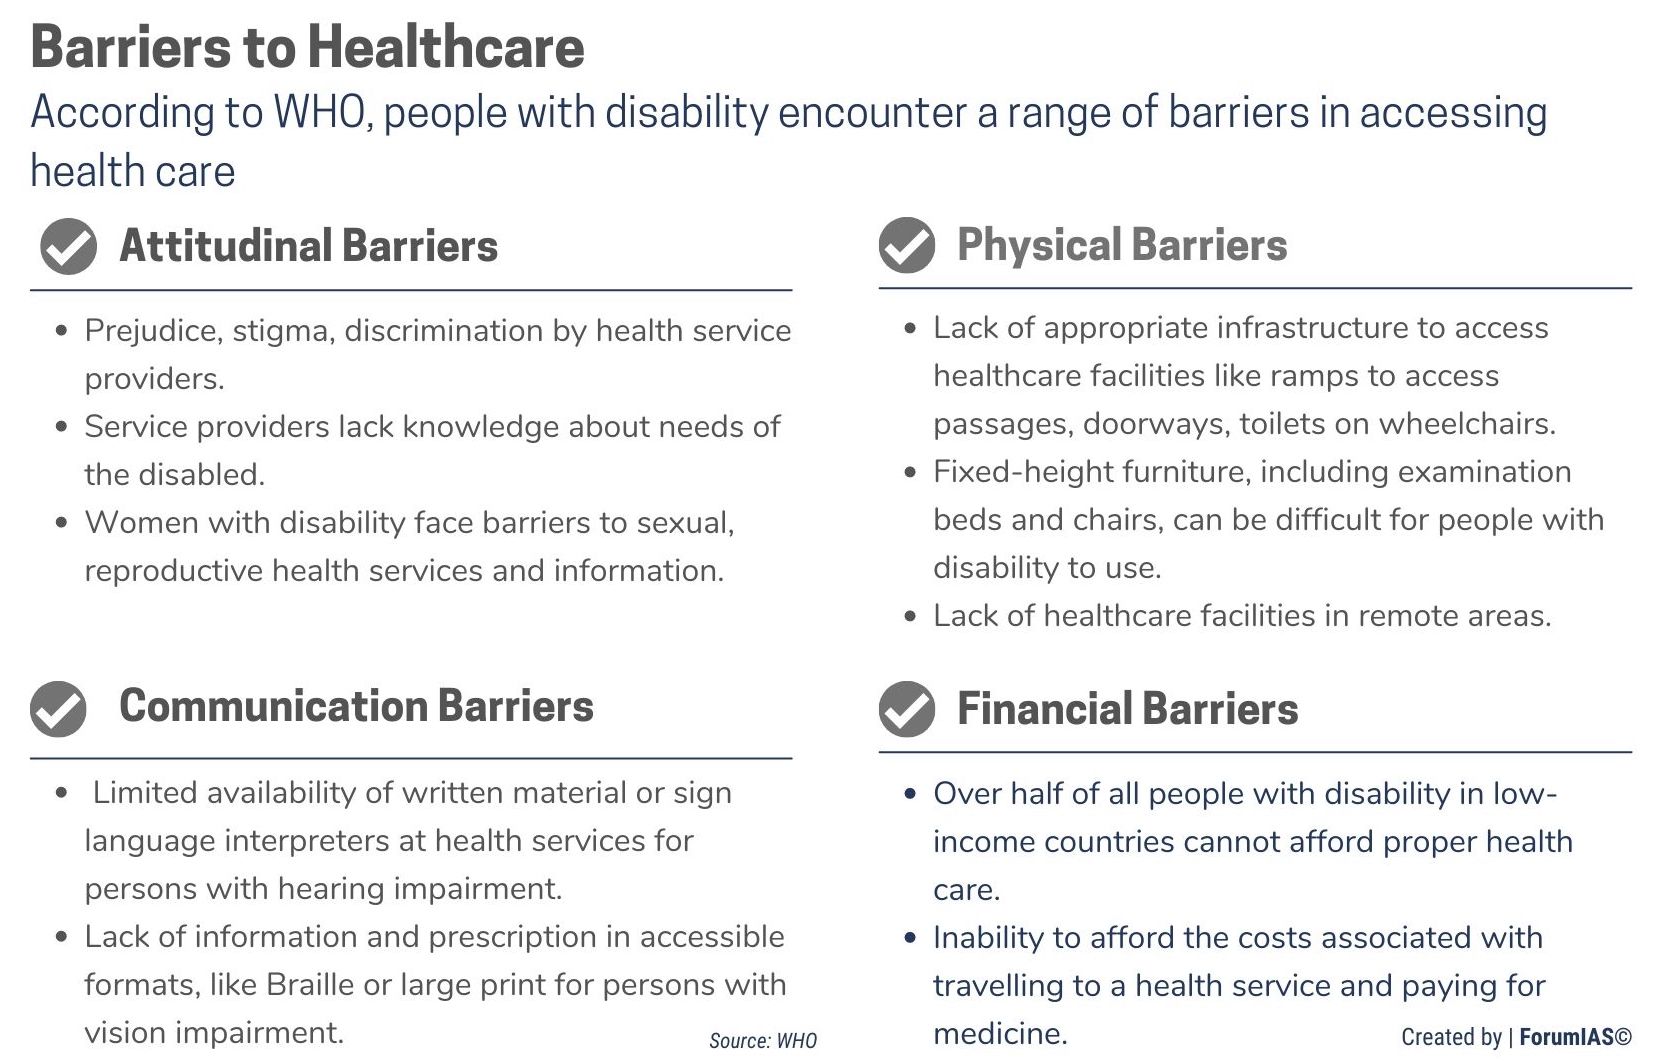 Barriers to Healthcare for Persons with Disabilities UPSC